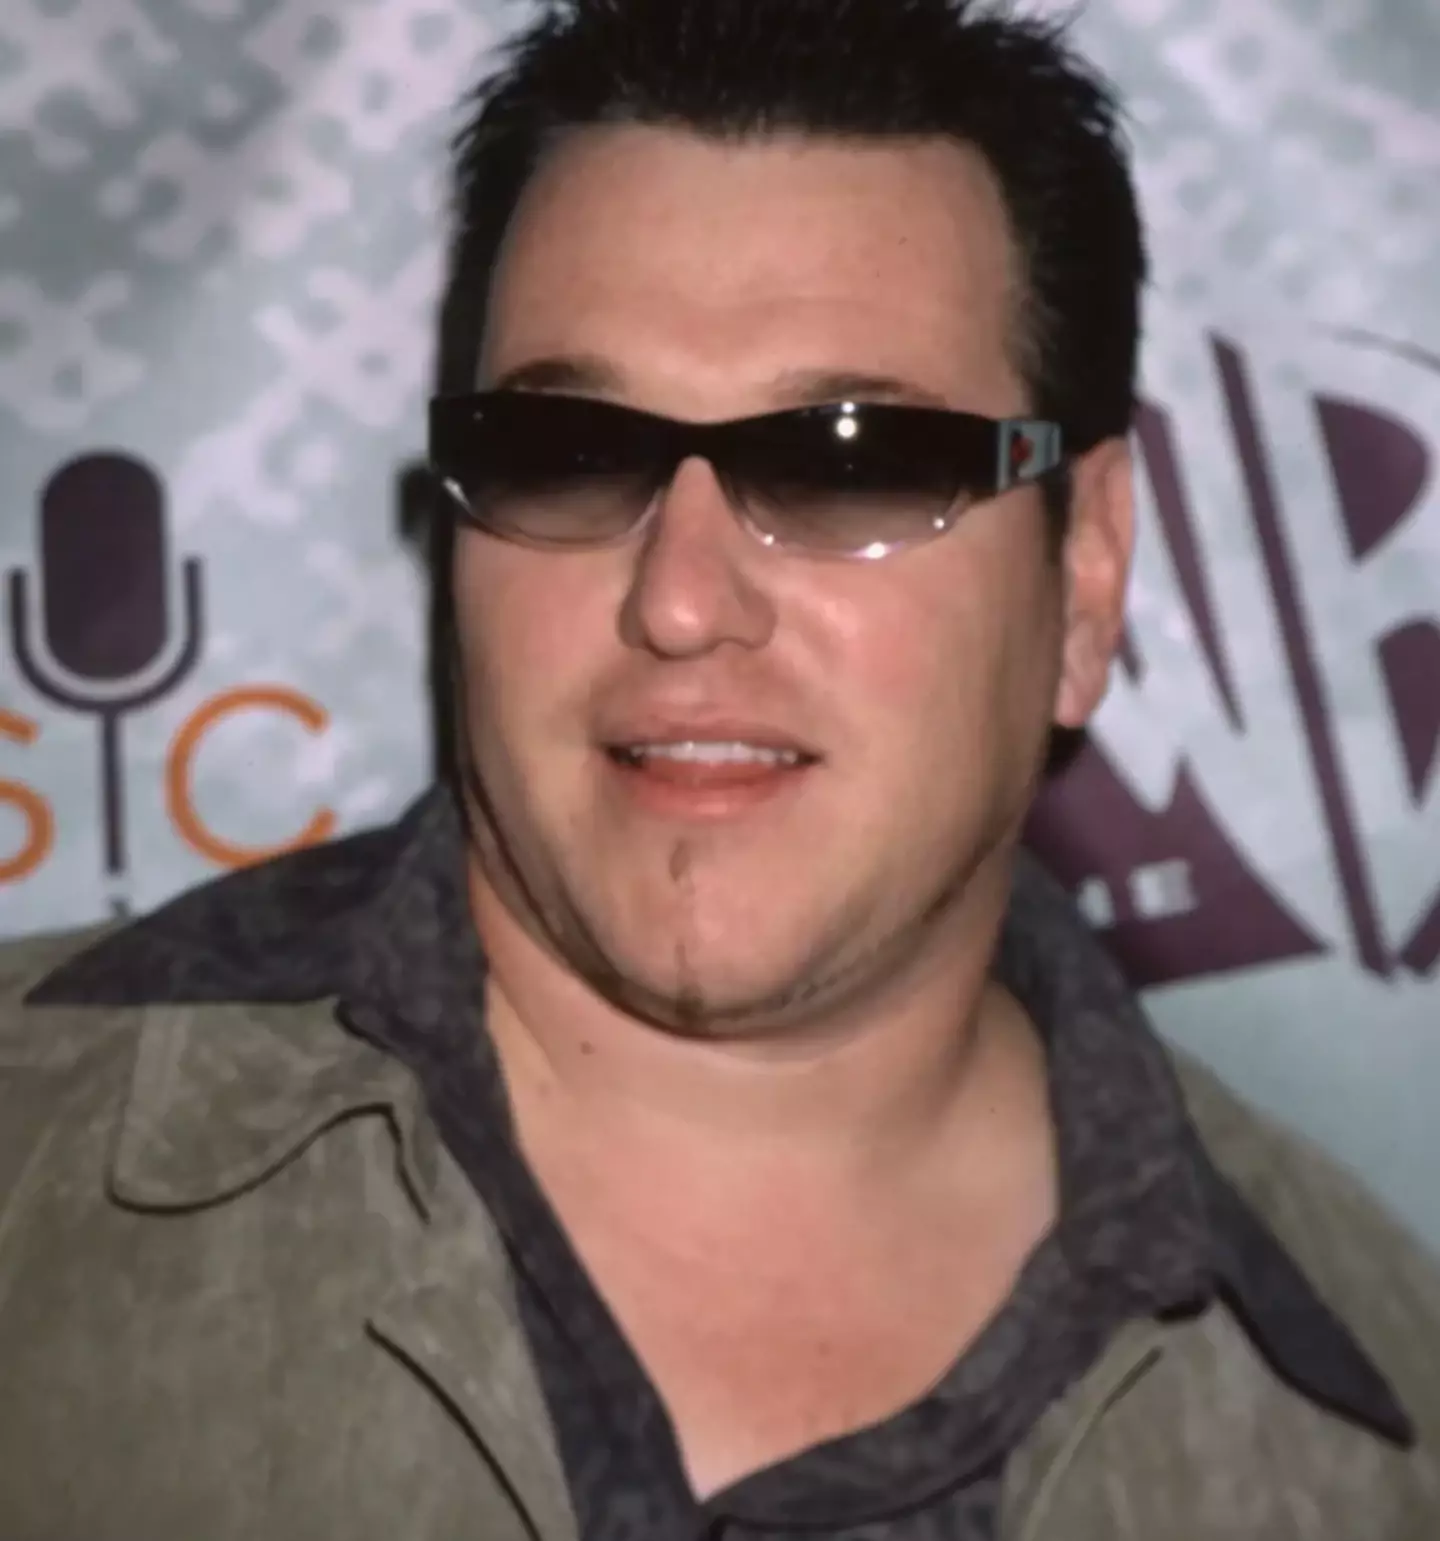 Smash Mouth star Steve Harwell has passed away age 56 from liver failure.